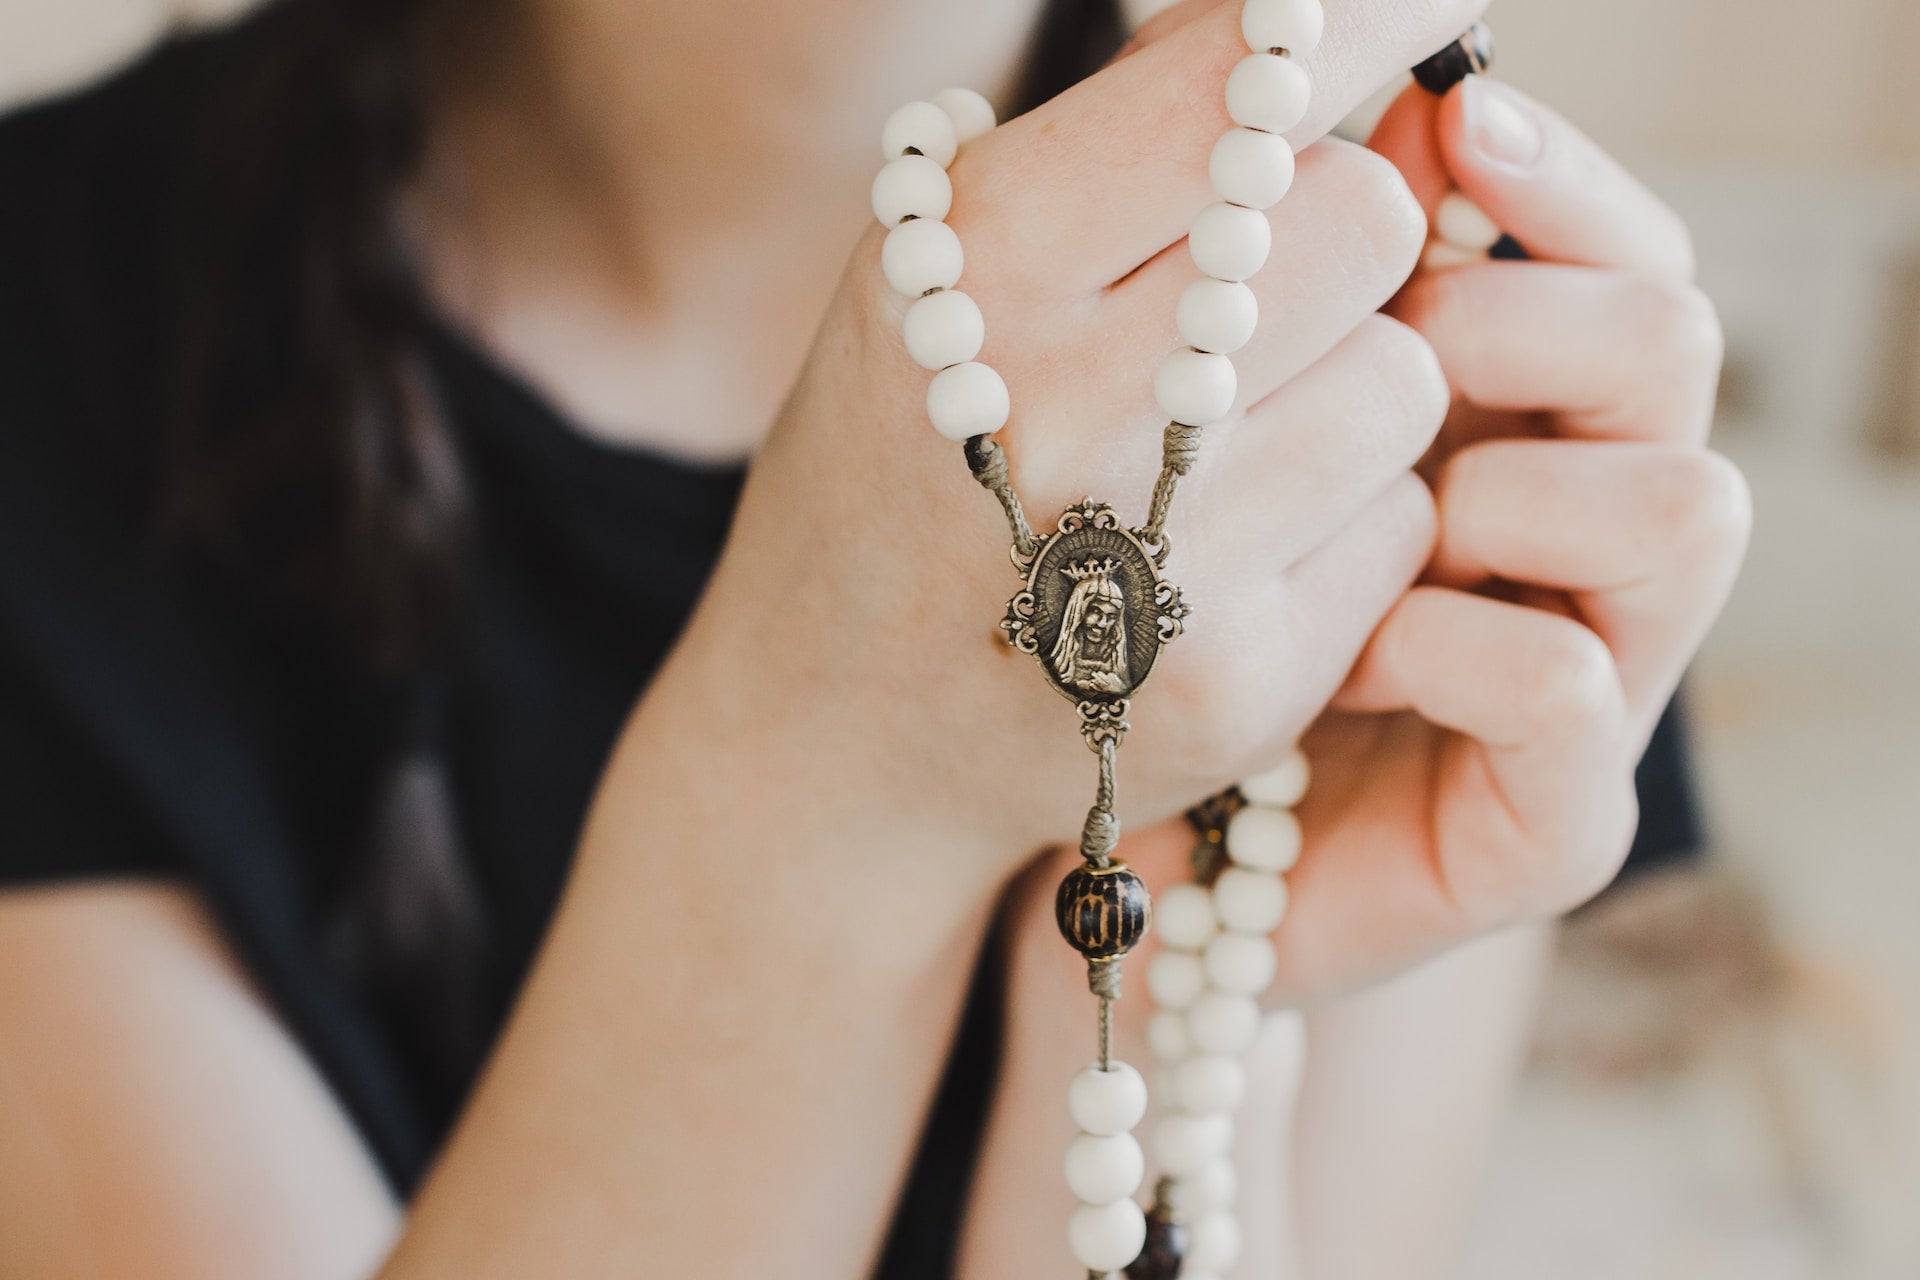 I'm Looking For A Book To: Grow in Devotion to the Rosary